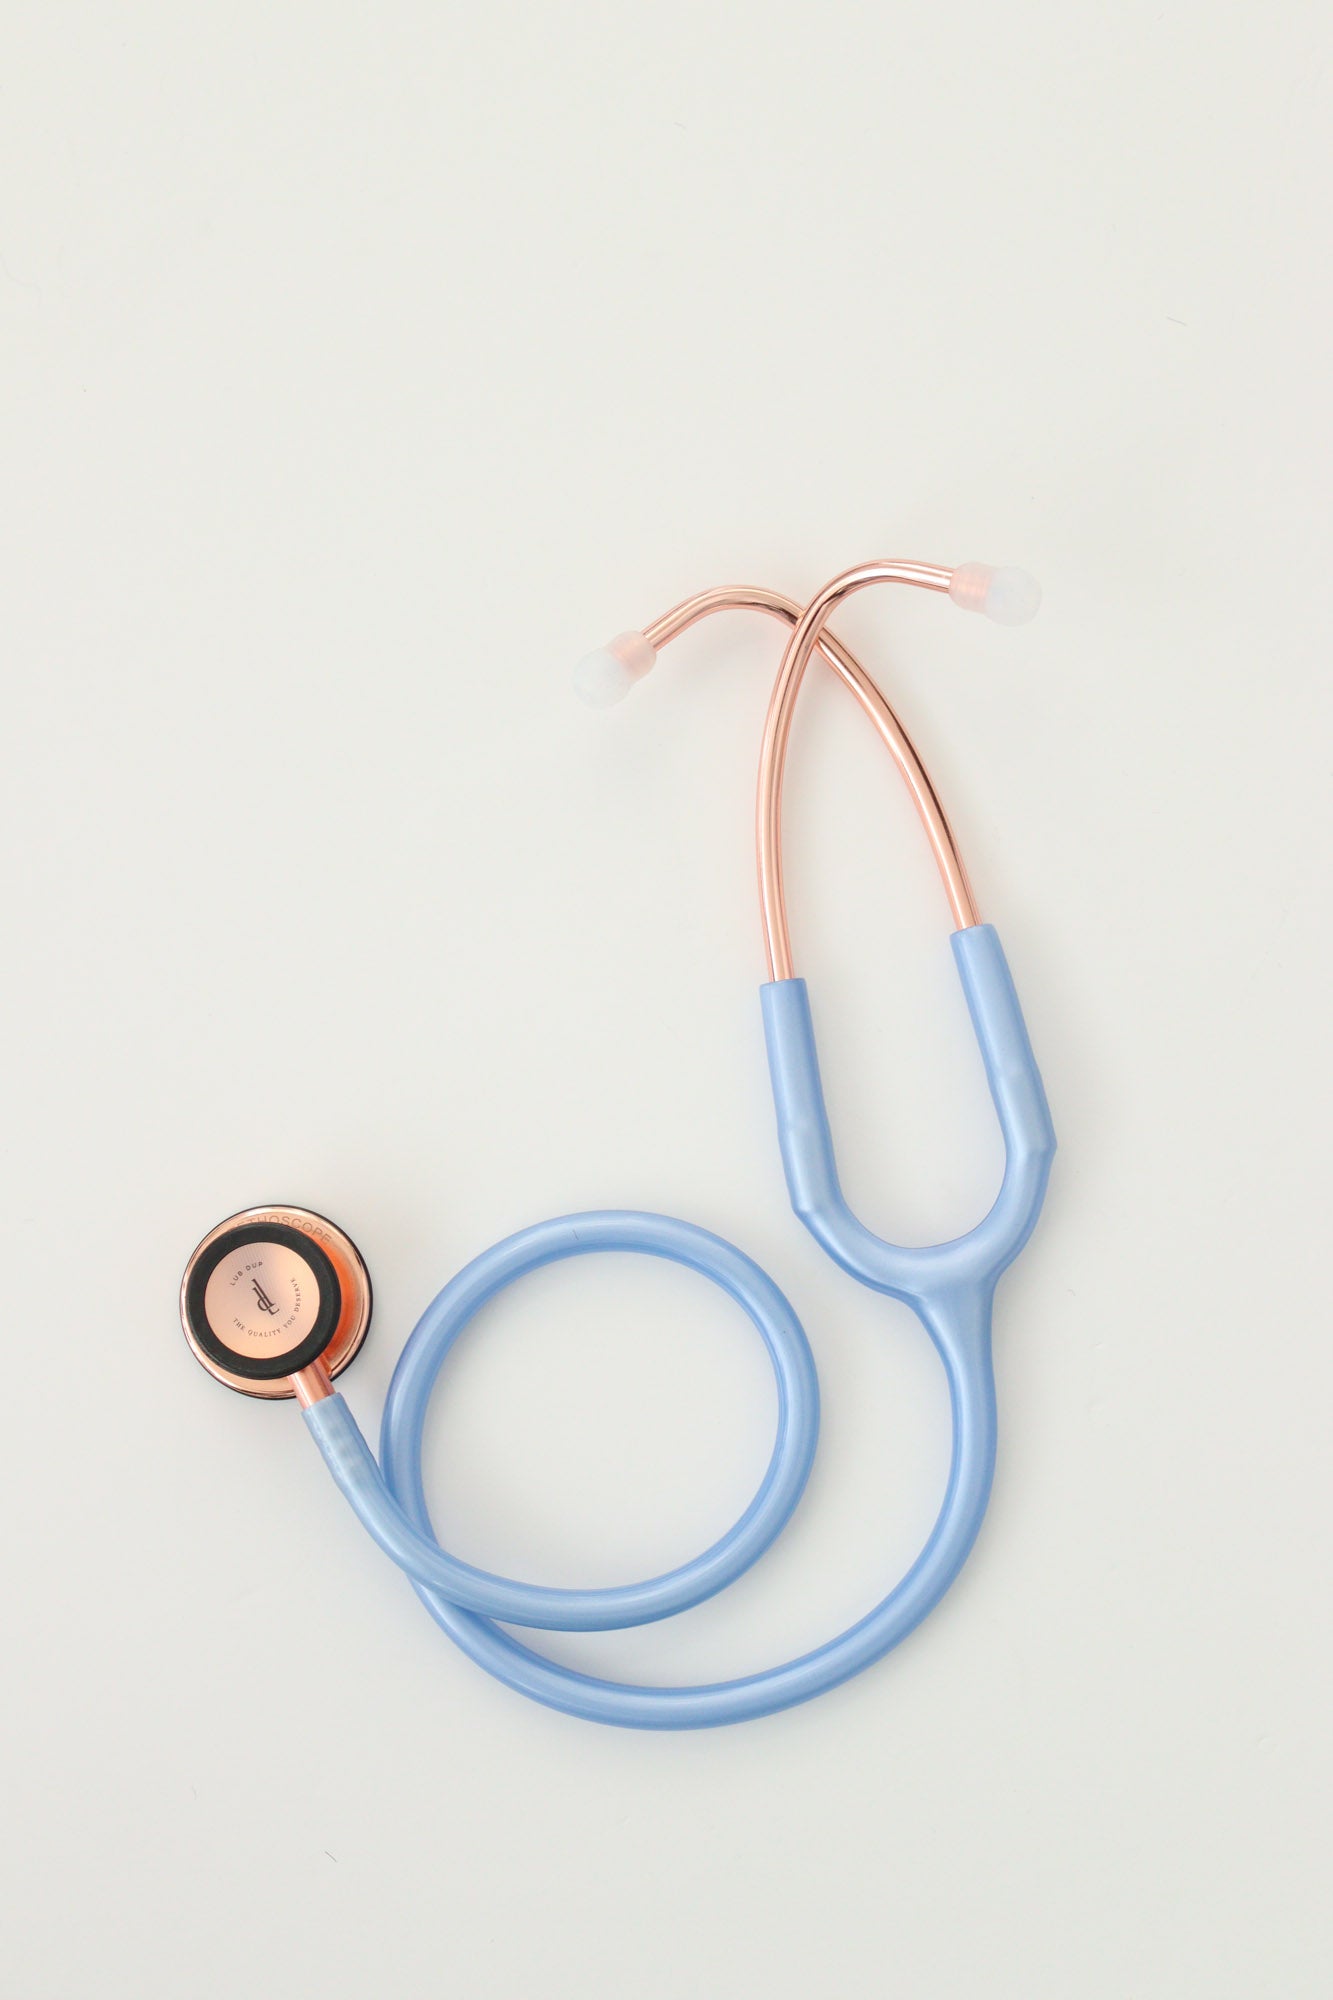 Lub Dup Adult Stethoscope - Ceil Blue-Rose Gold Edition